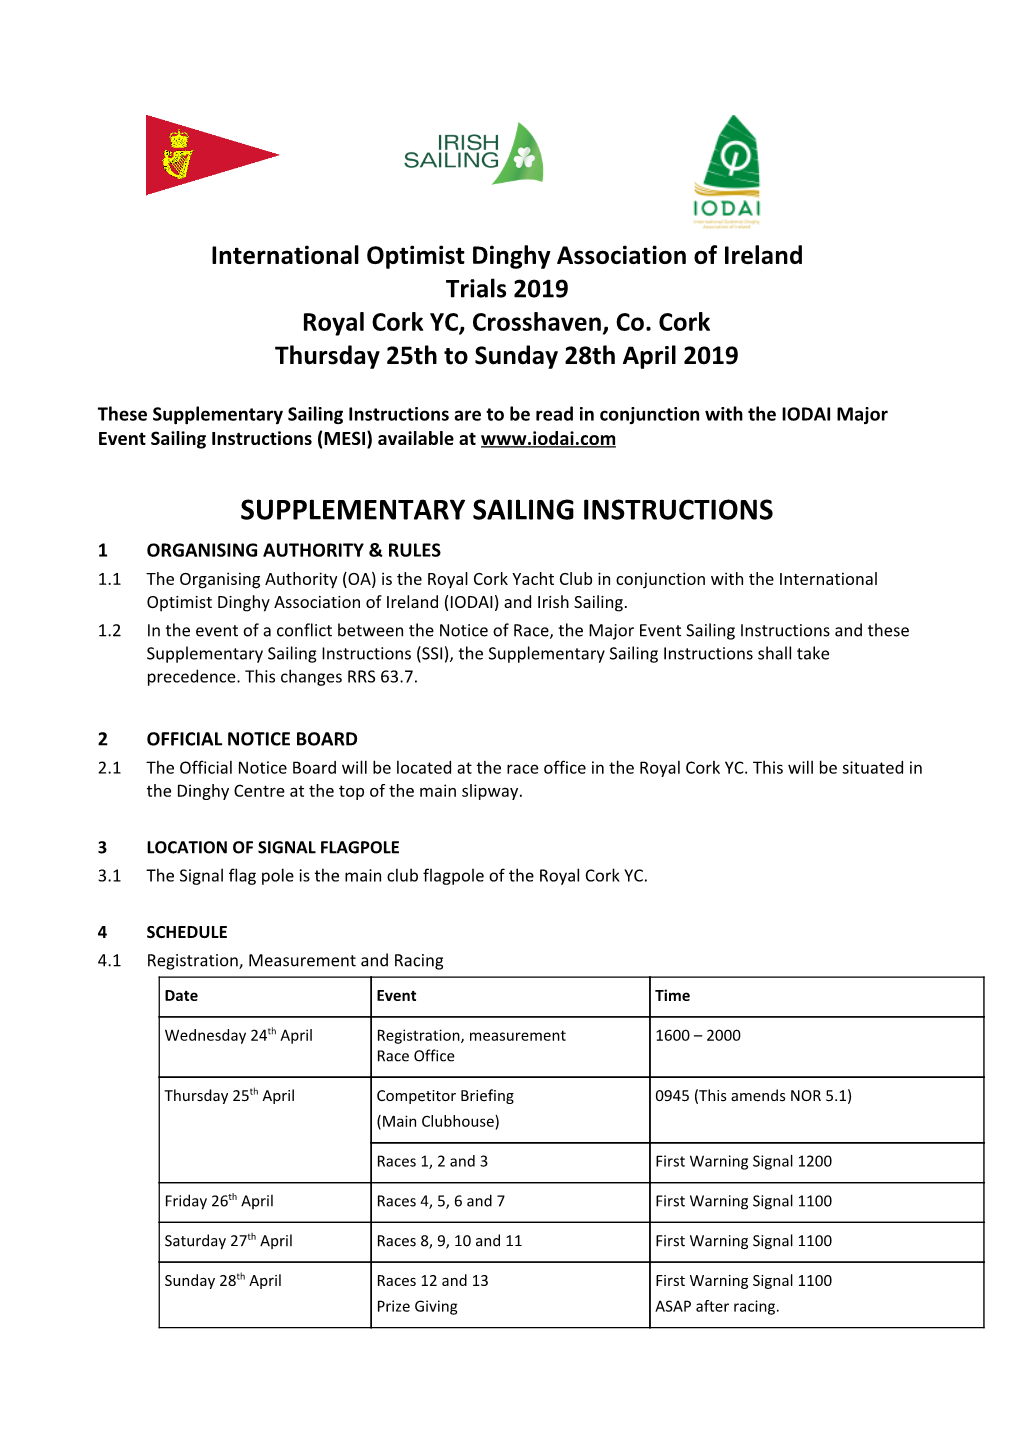 Supplementary Sailing Instructions Are to Be Read in Conjunction with the IODAI Major Event Sailing Instructions (MESI) Available at ​